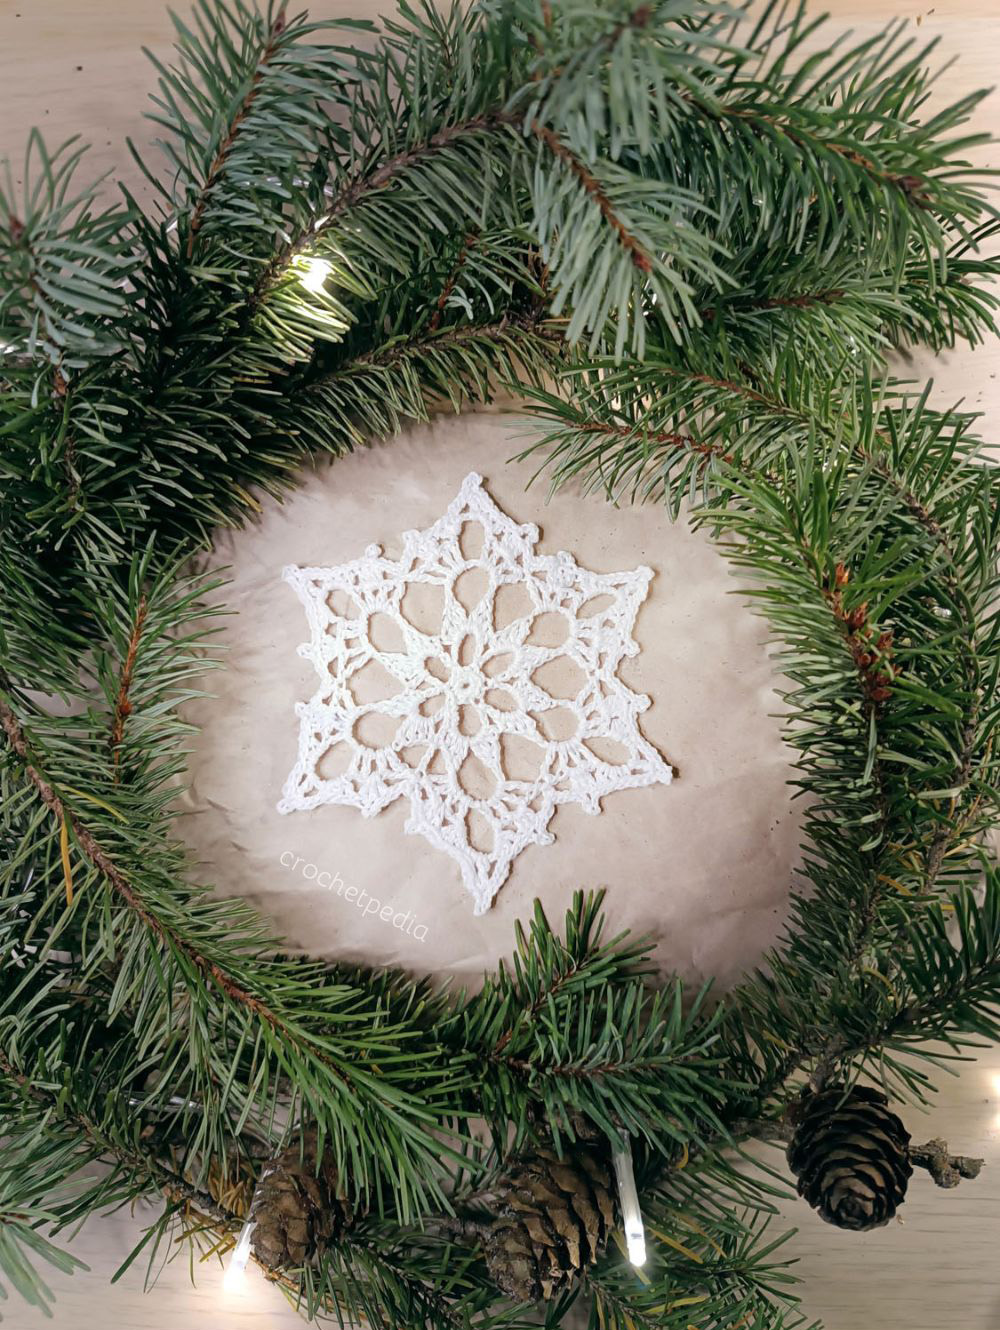 A white snowflake is surrounded by pine cones.